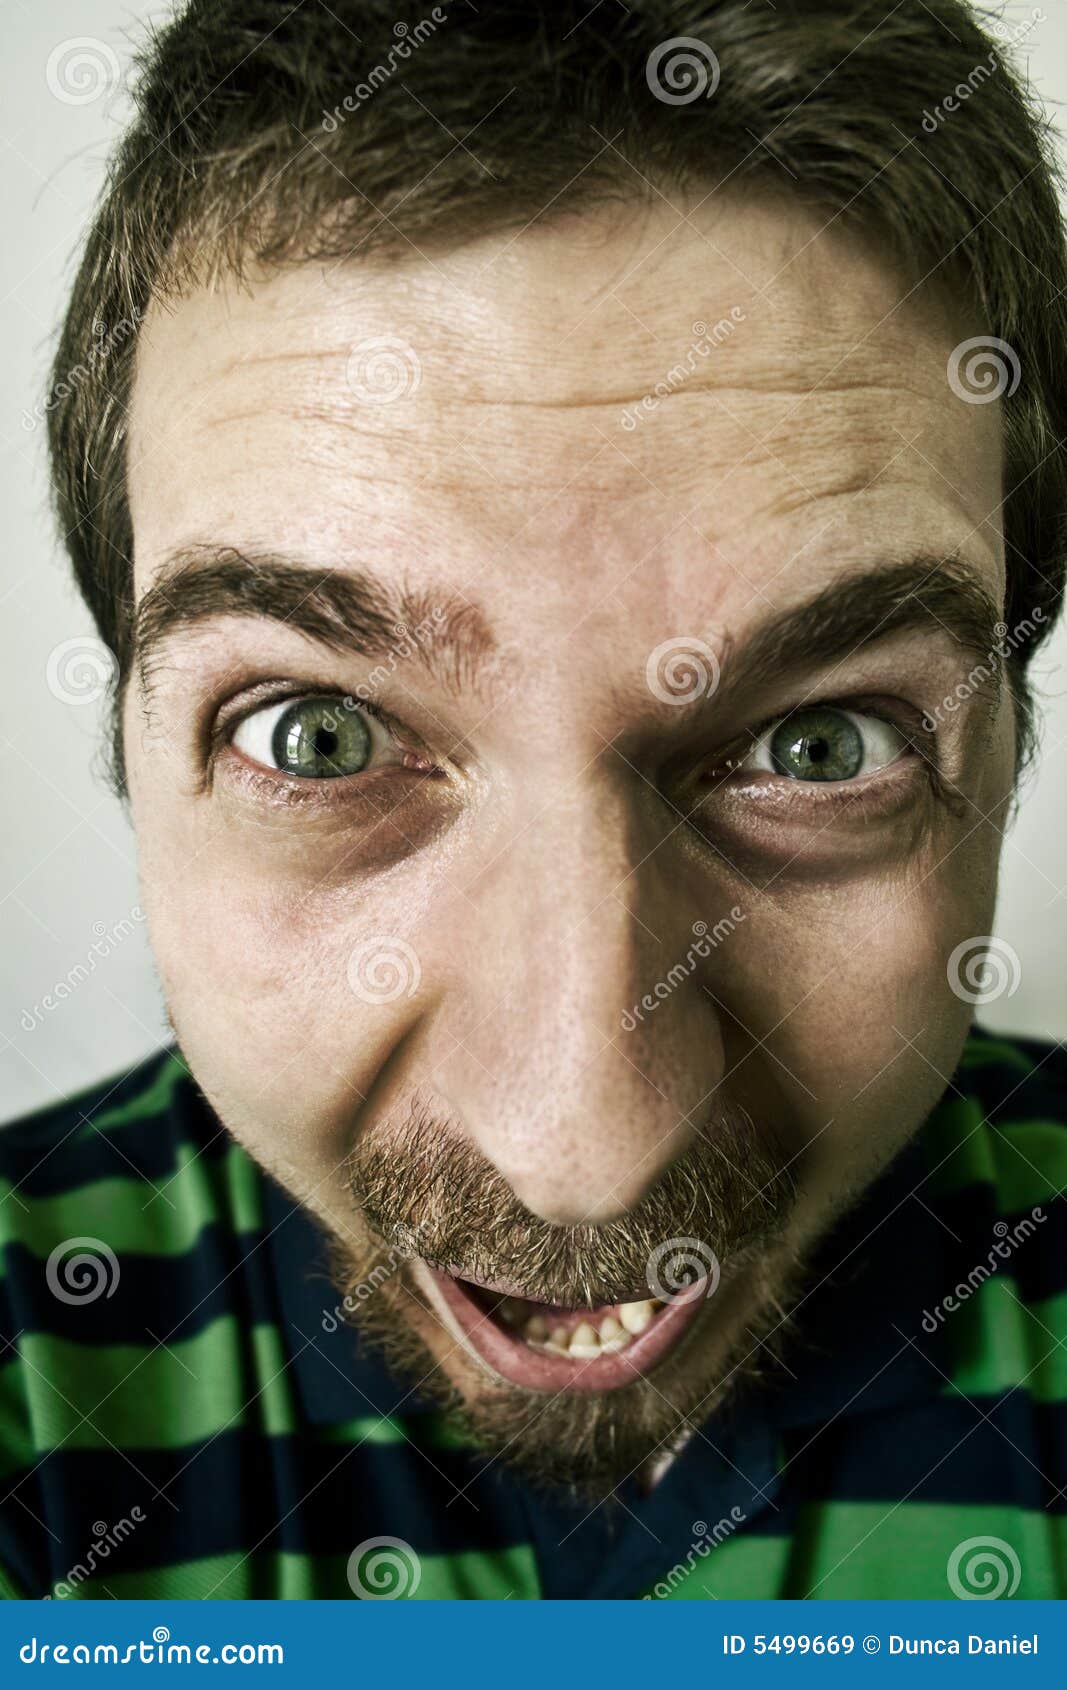 Scream of Funny Excited Man Stock Image - Image of loud, comic: 5499669